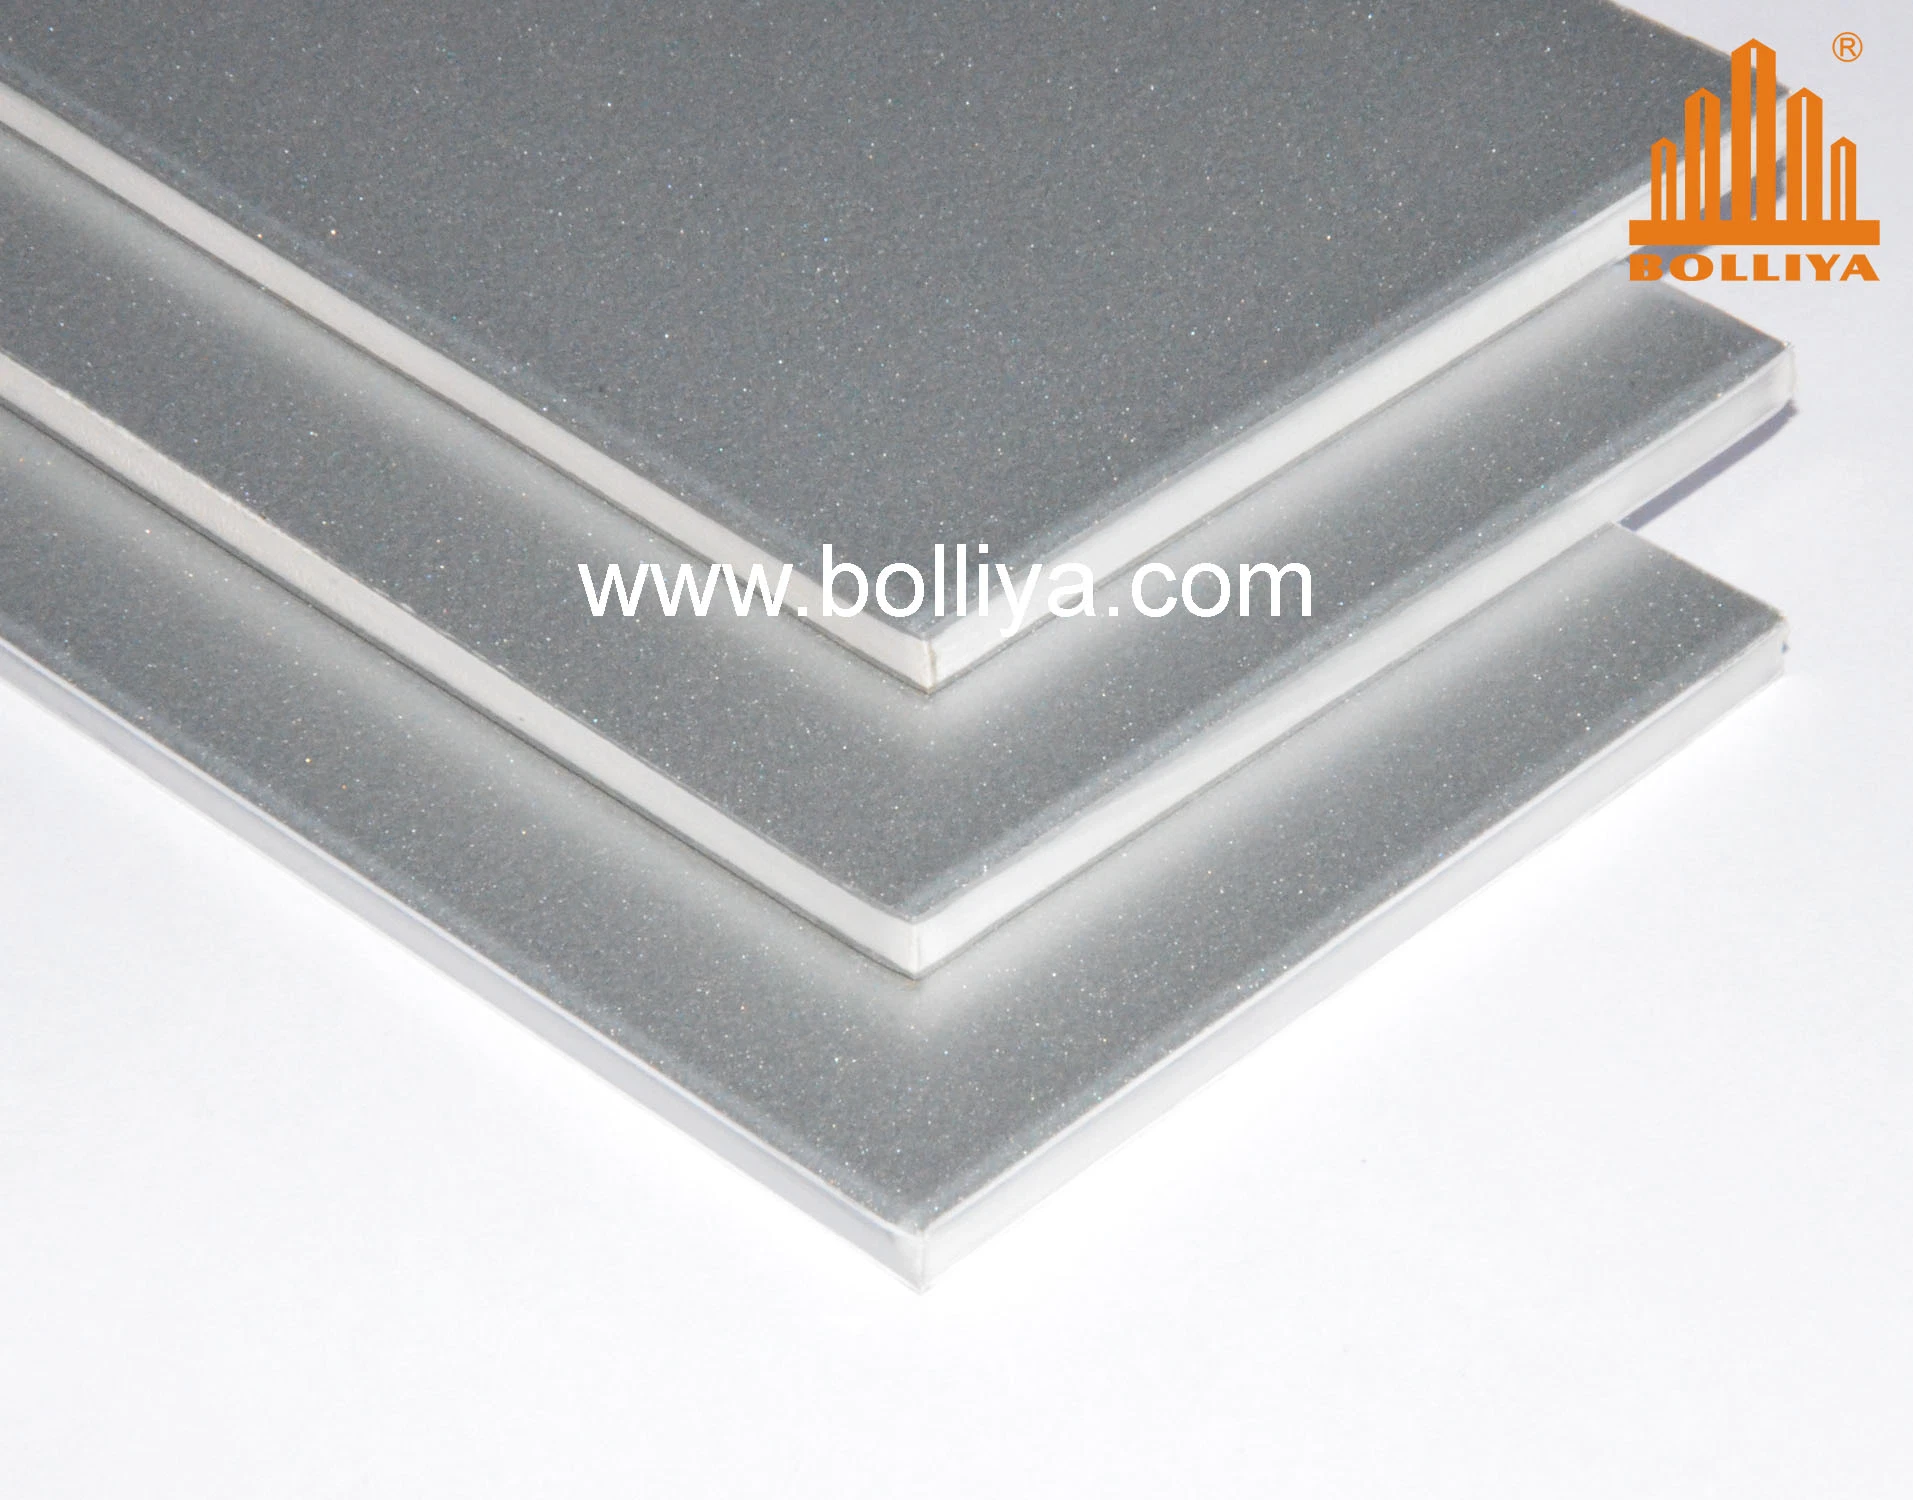 Manufacturer Brushed Glossy Red Aluminum Sandwich Material Acm Aluminium Plastic Bond Composite Fire Rated Fireproof ACP Sheets for Building Roof Interior Door